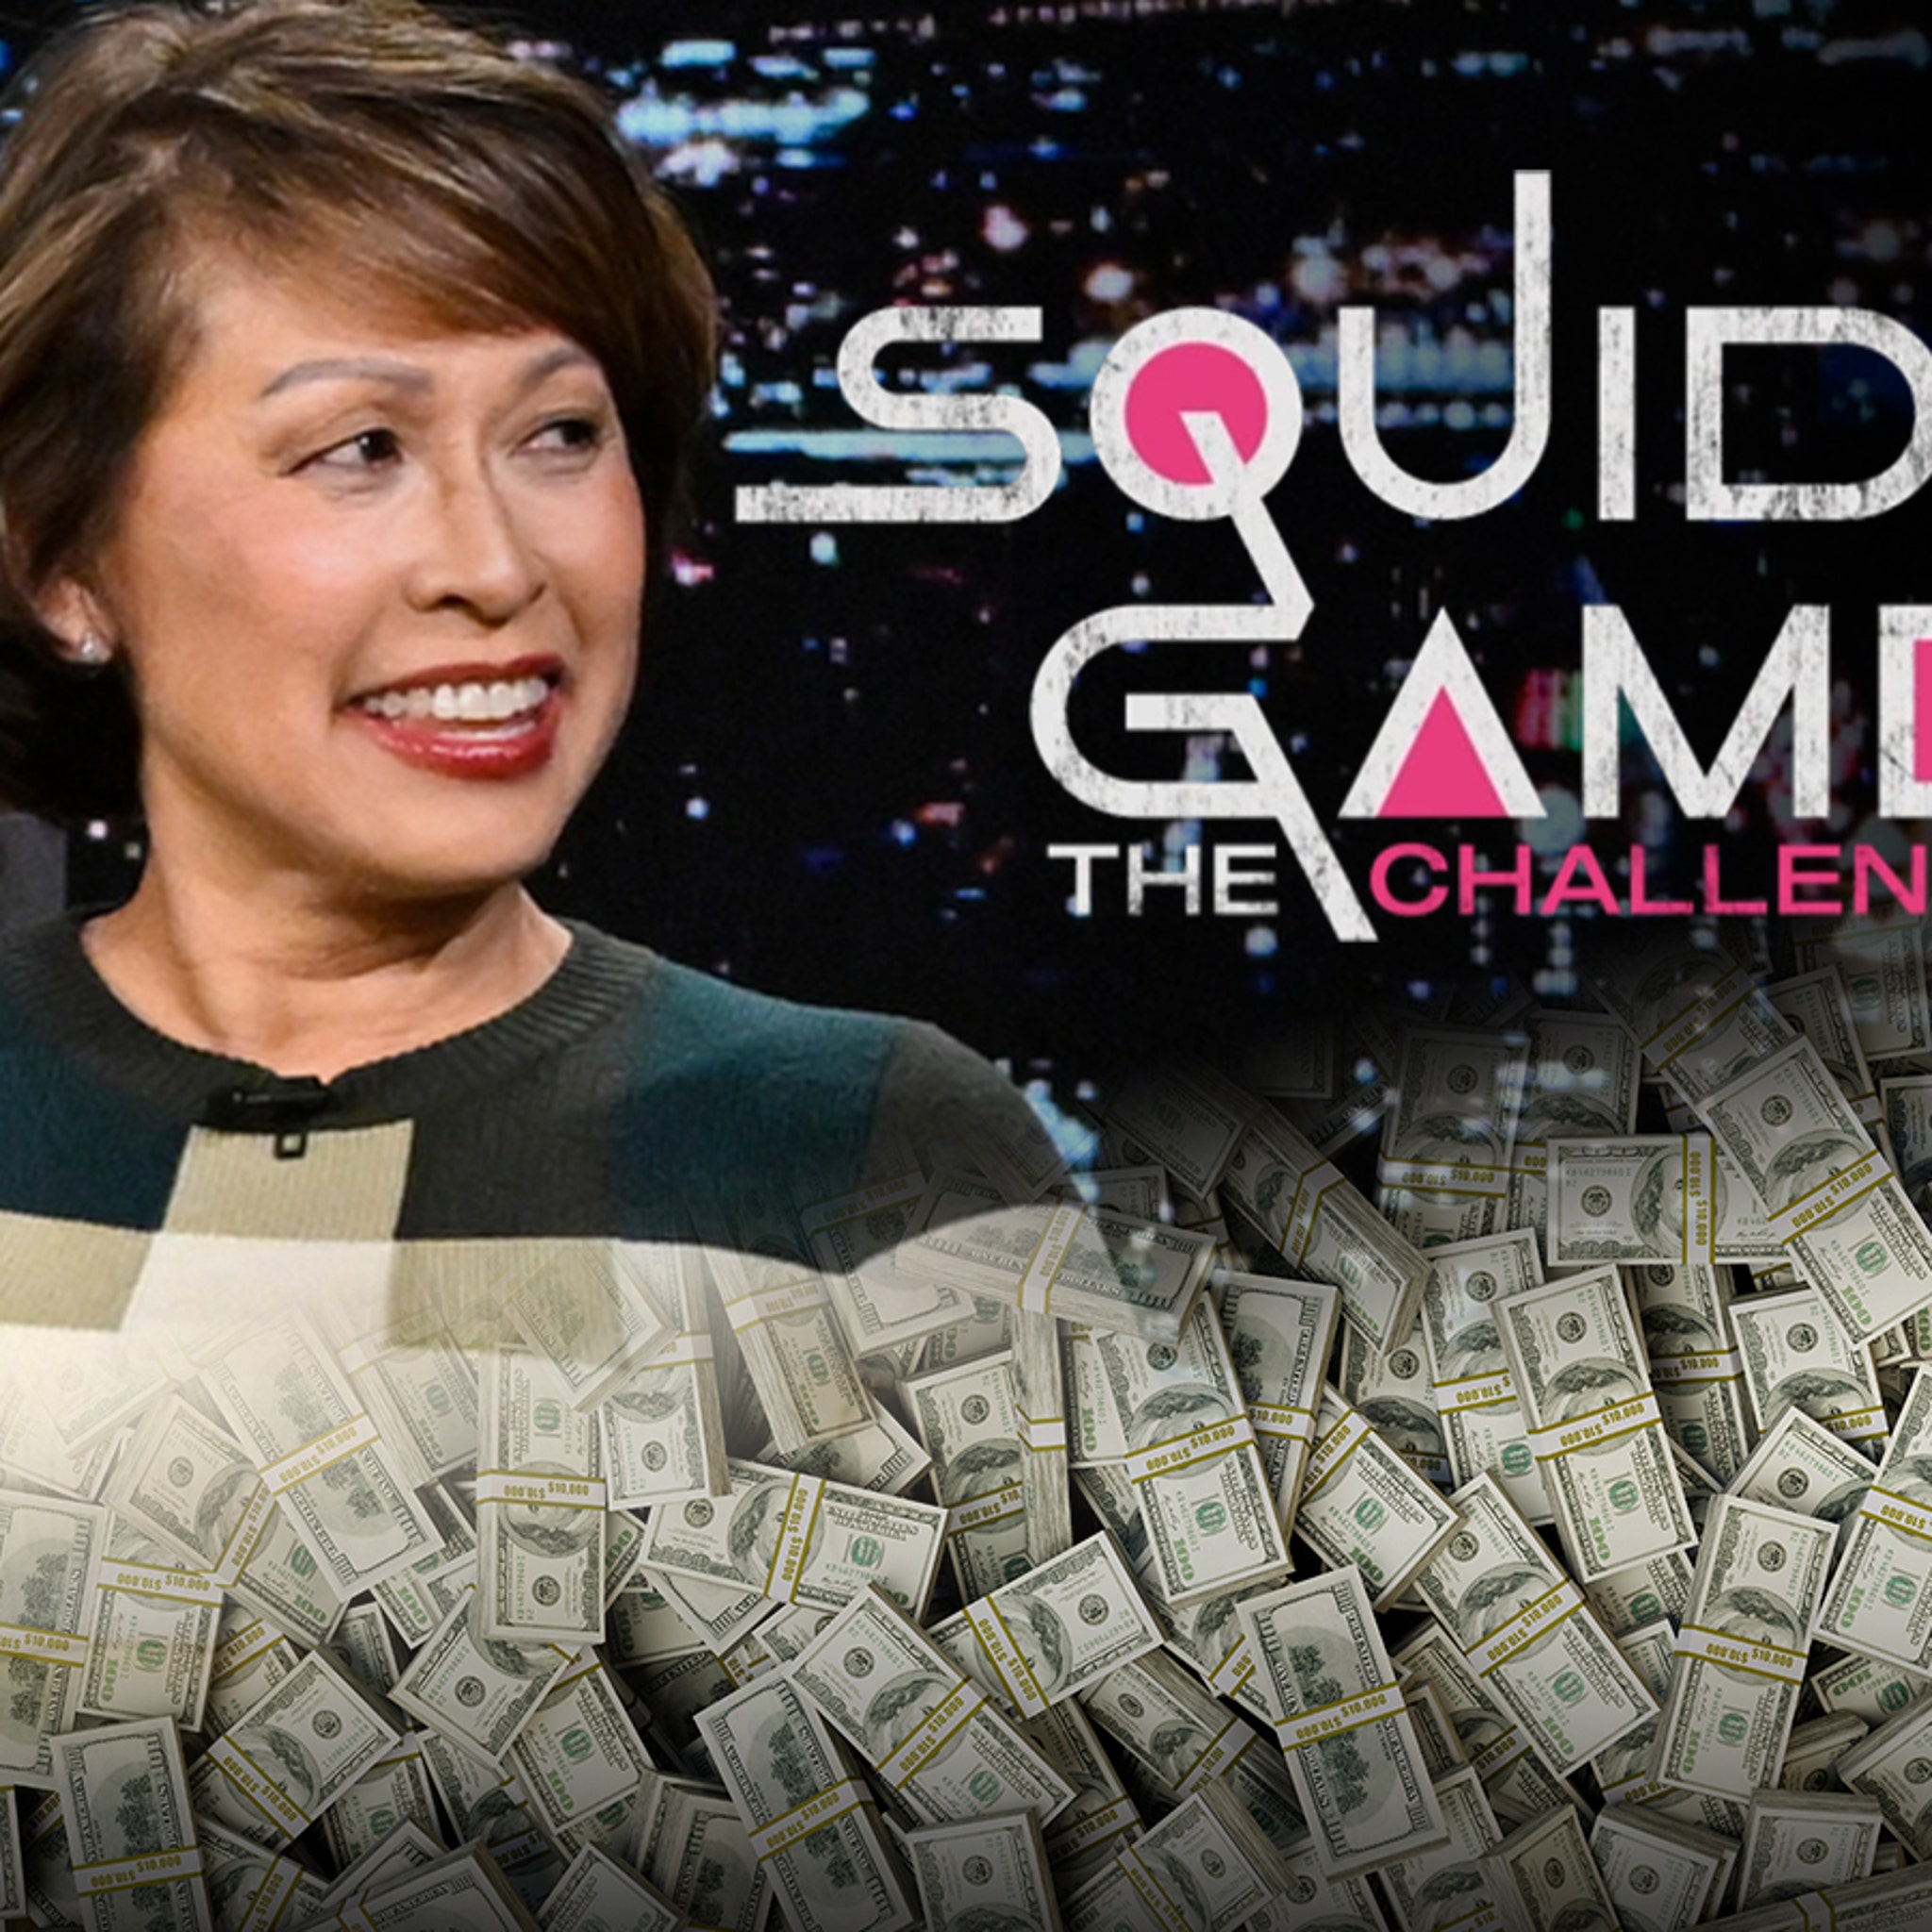 No Prize Money For Squid Game: The Challenge Winner Yet, But Season 2  Announced - Koreaboo